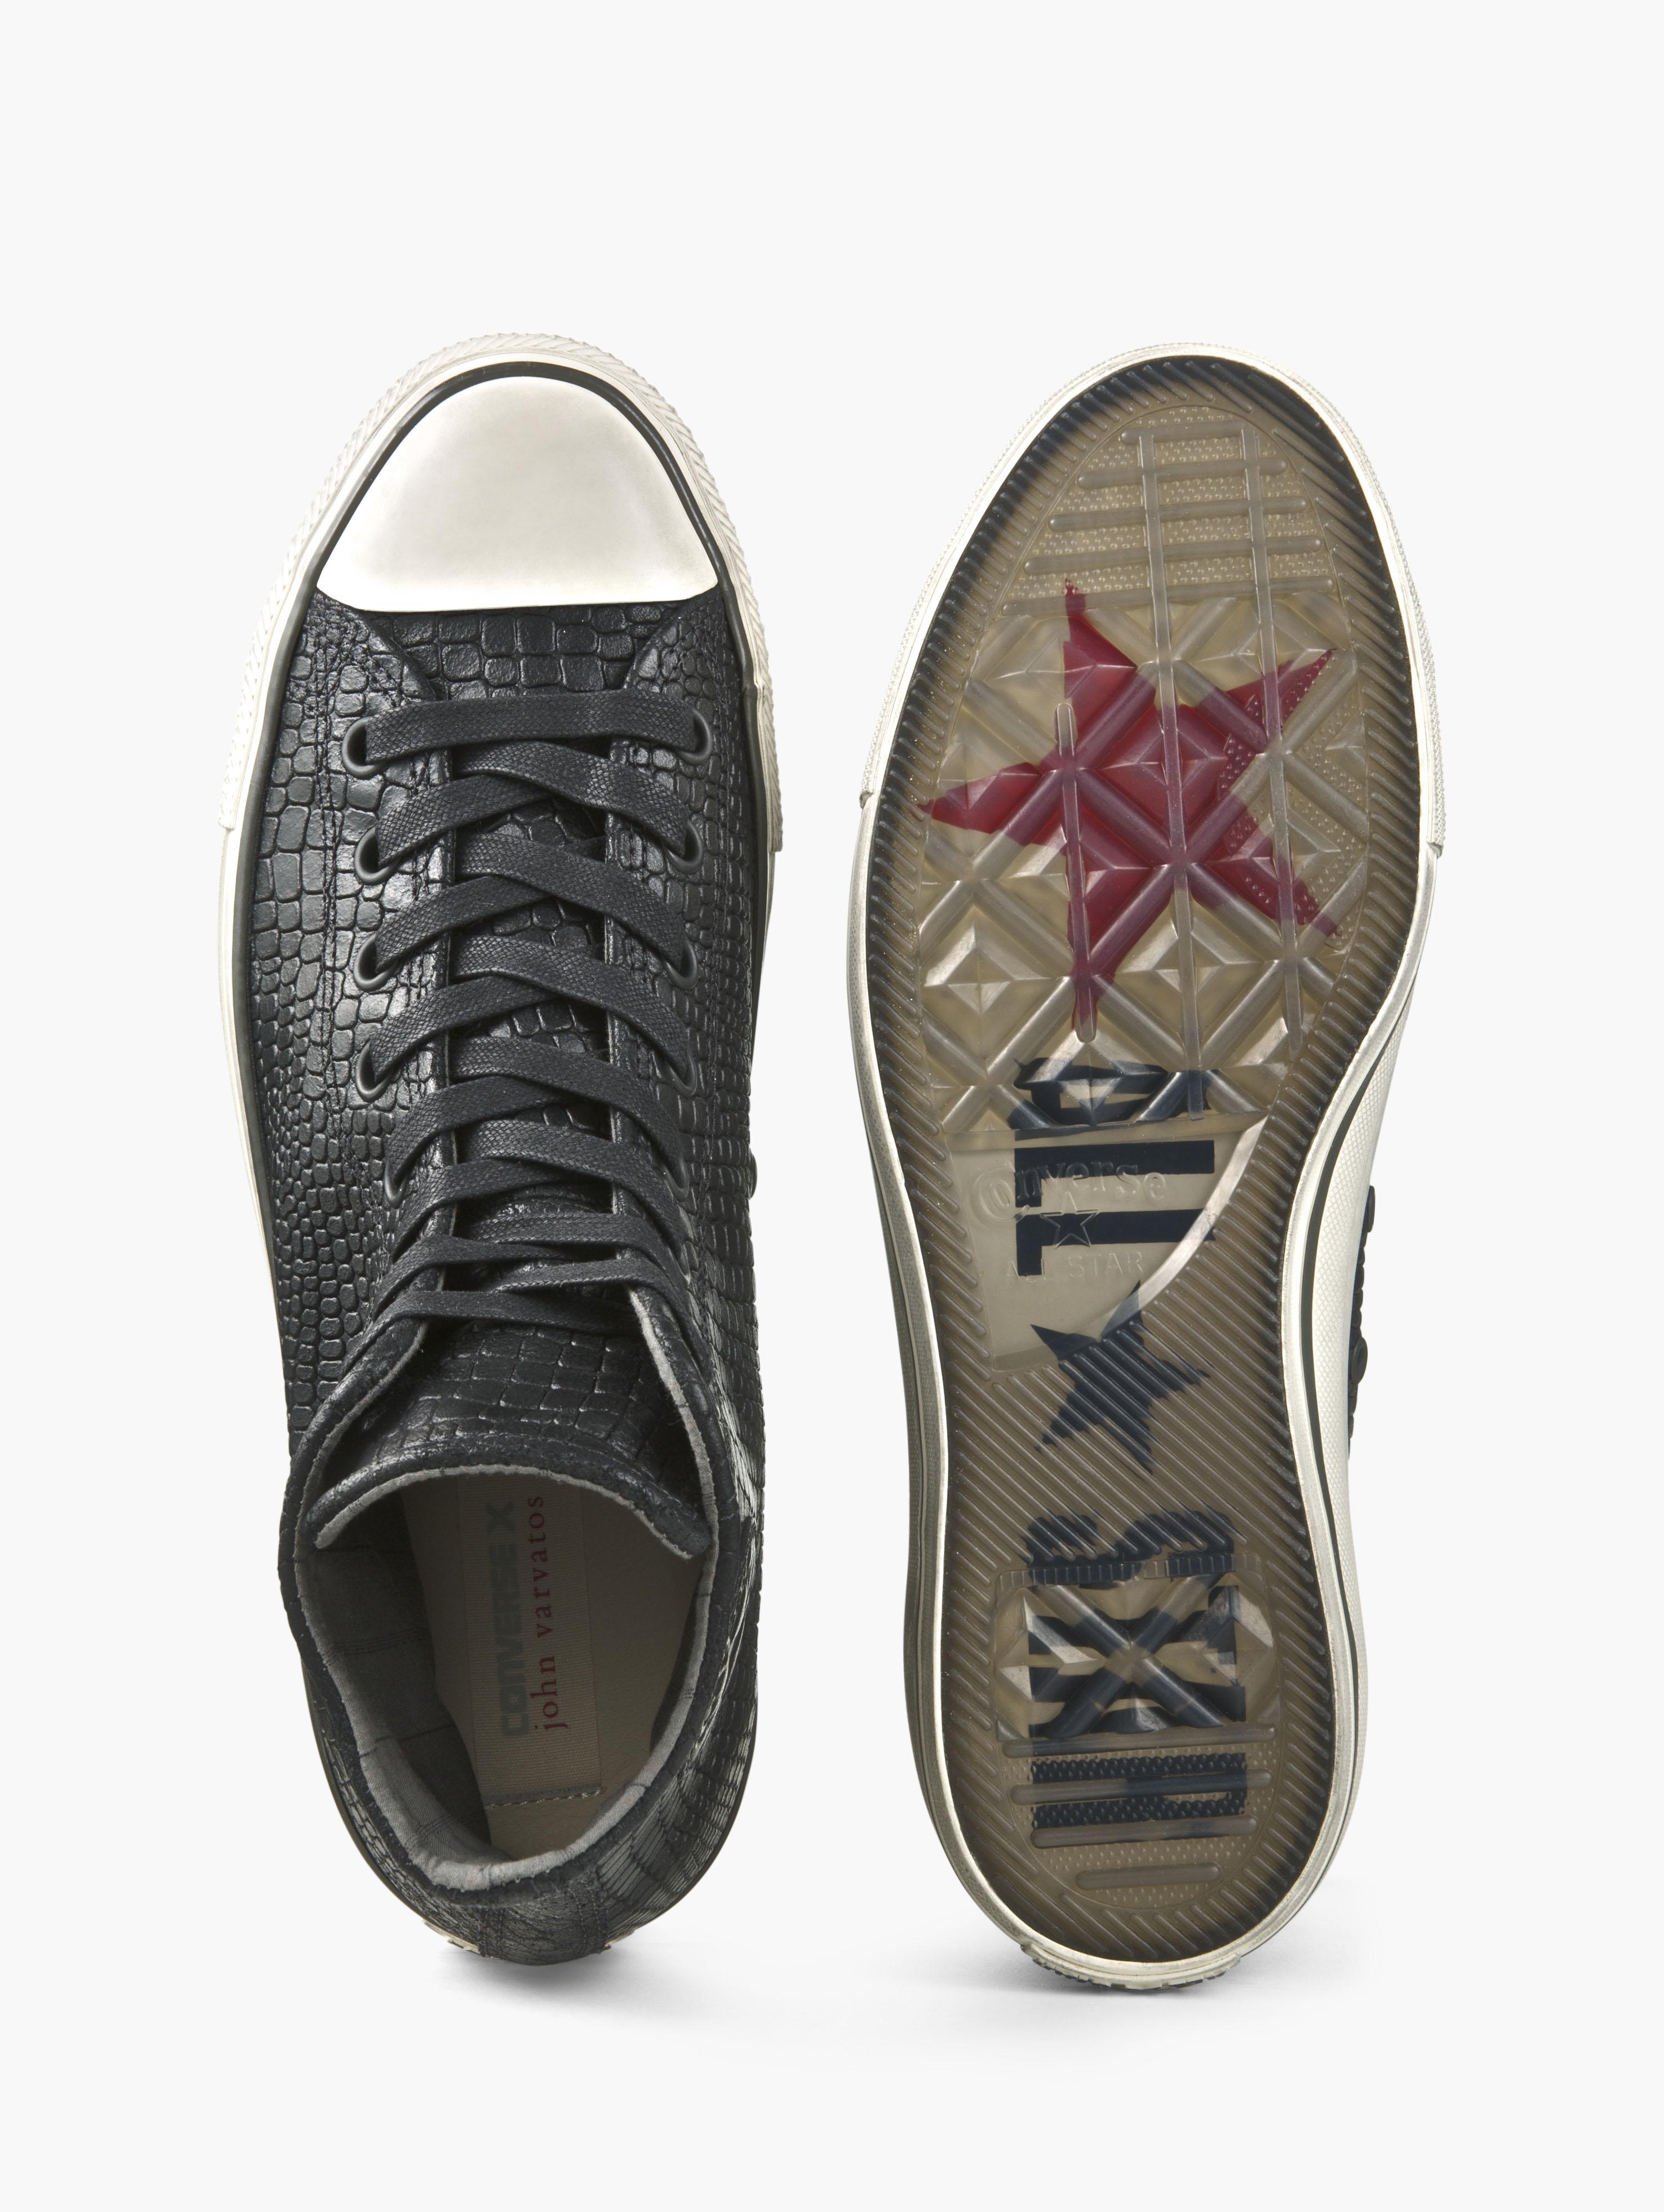 Reptile Embossed Chuck Taylor High Top image number 2